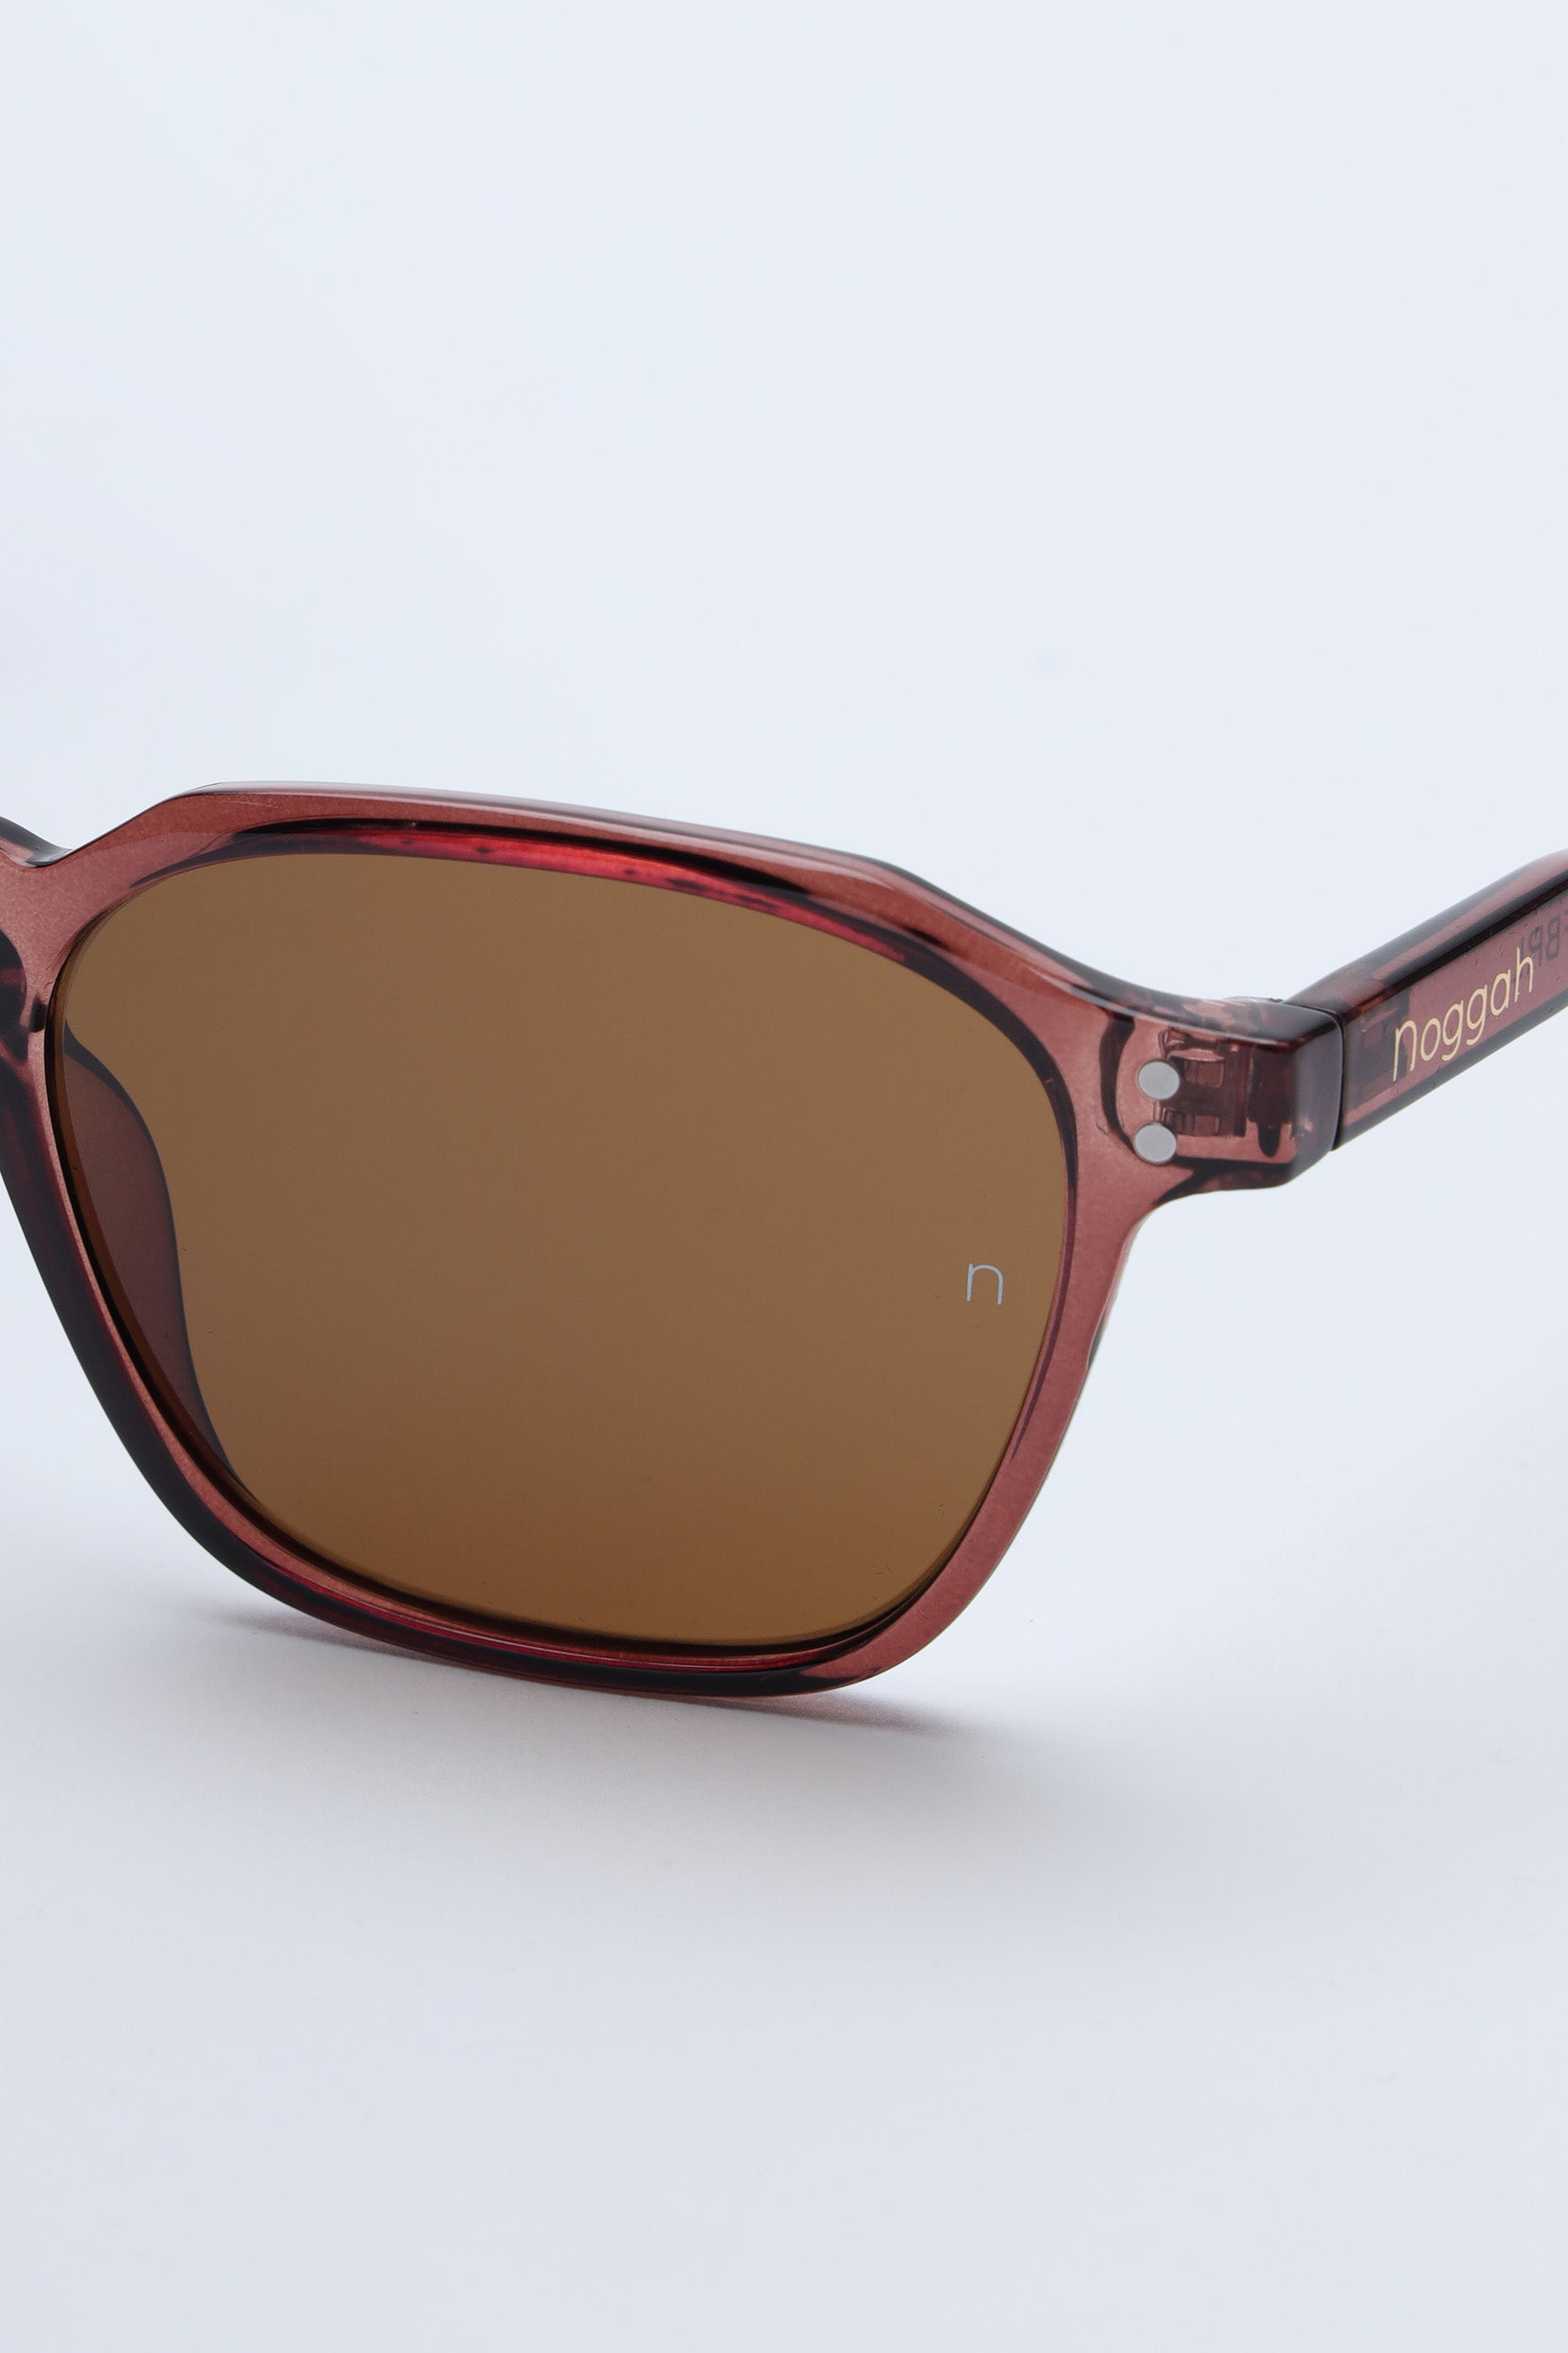 NS1006BRFBRL PC Brown Frame with Brown Glass Lens Sunglasses